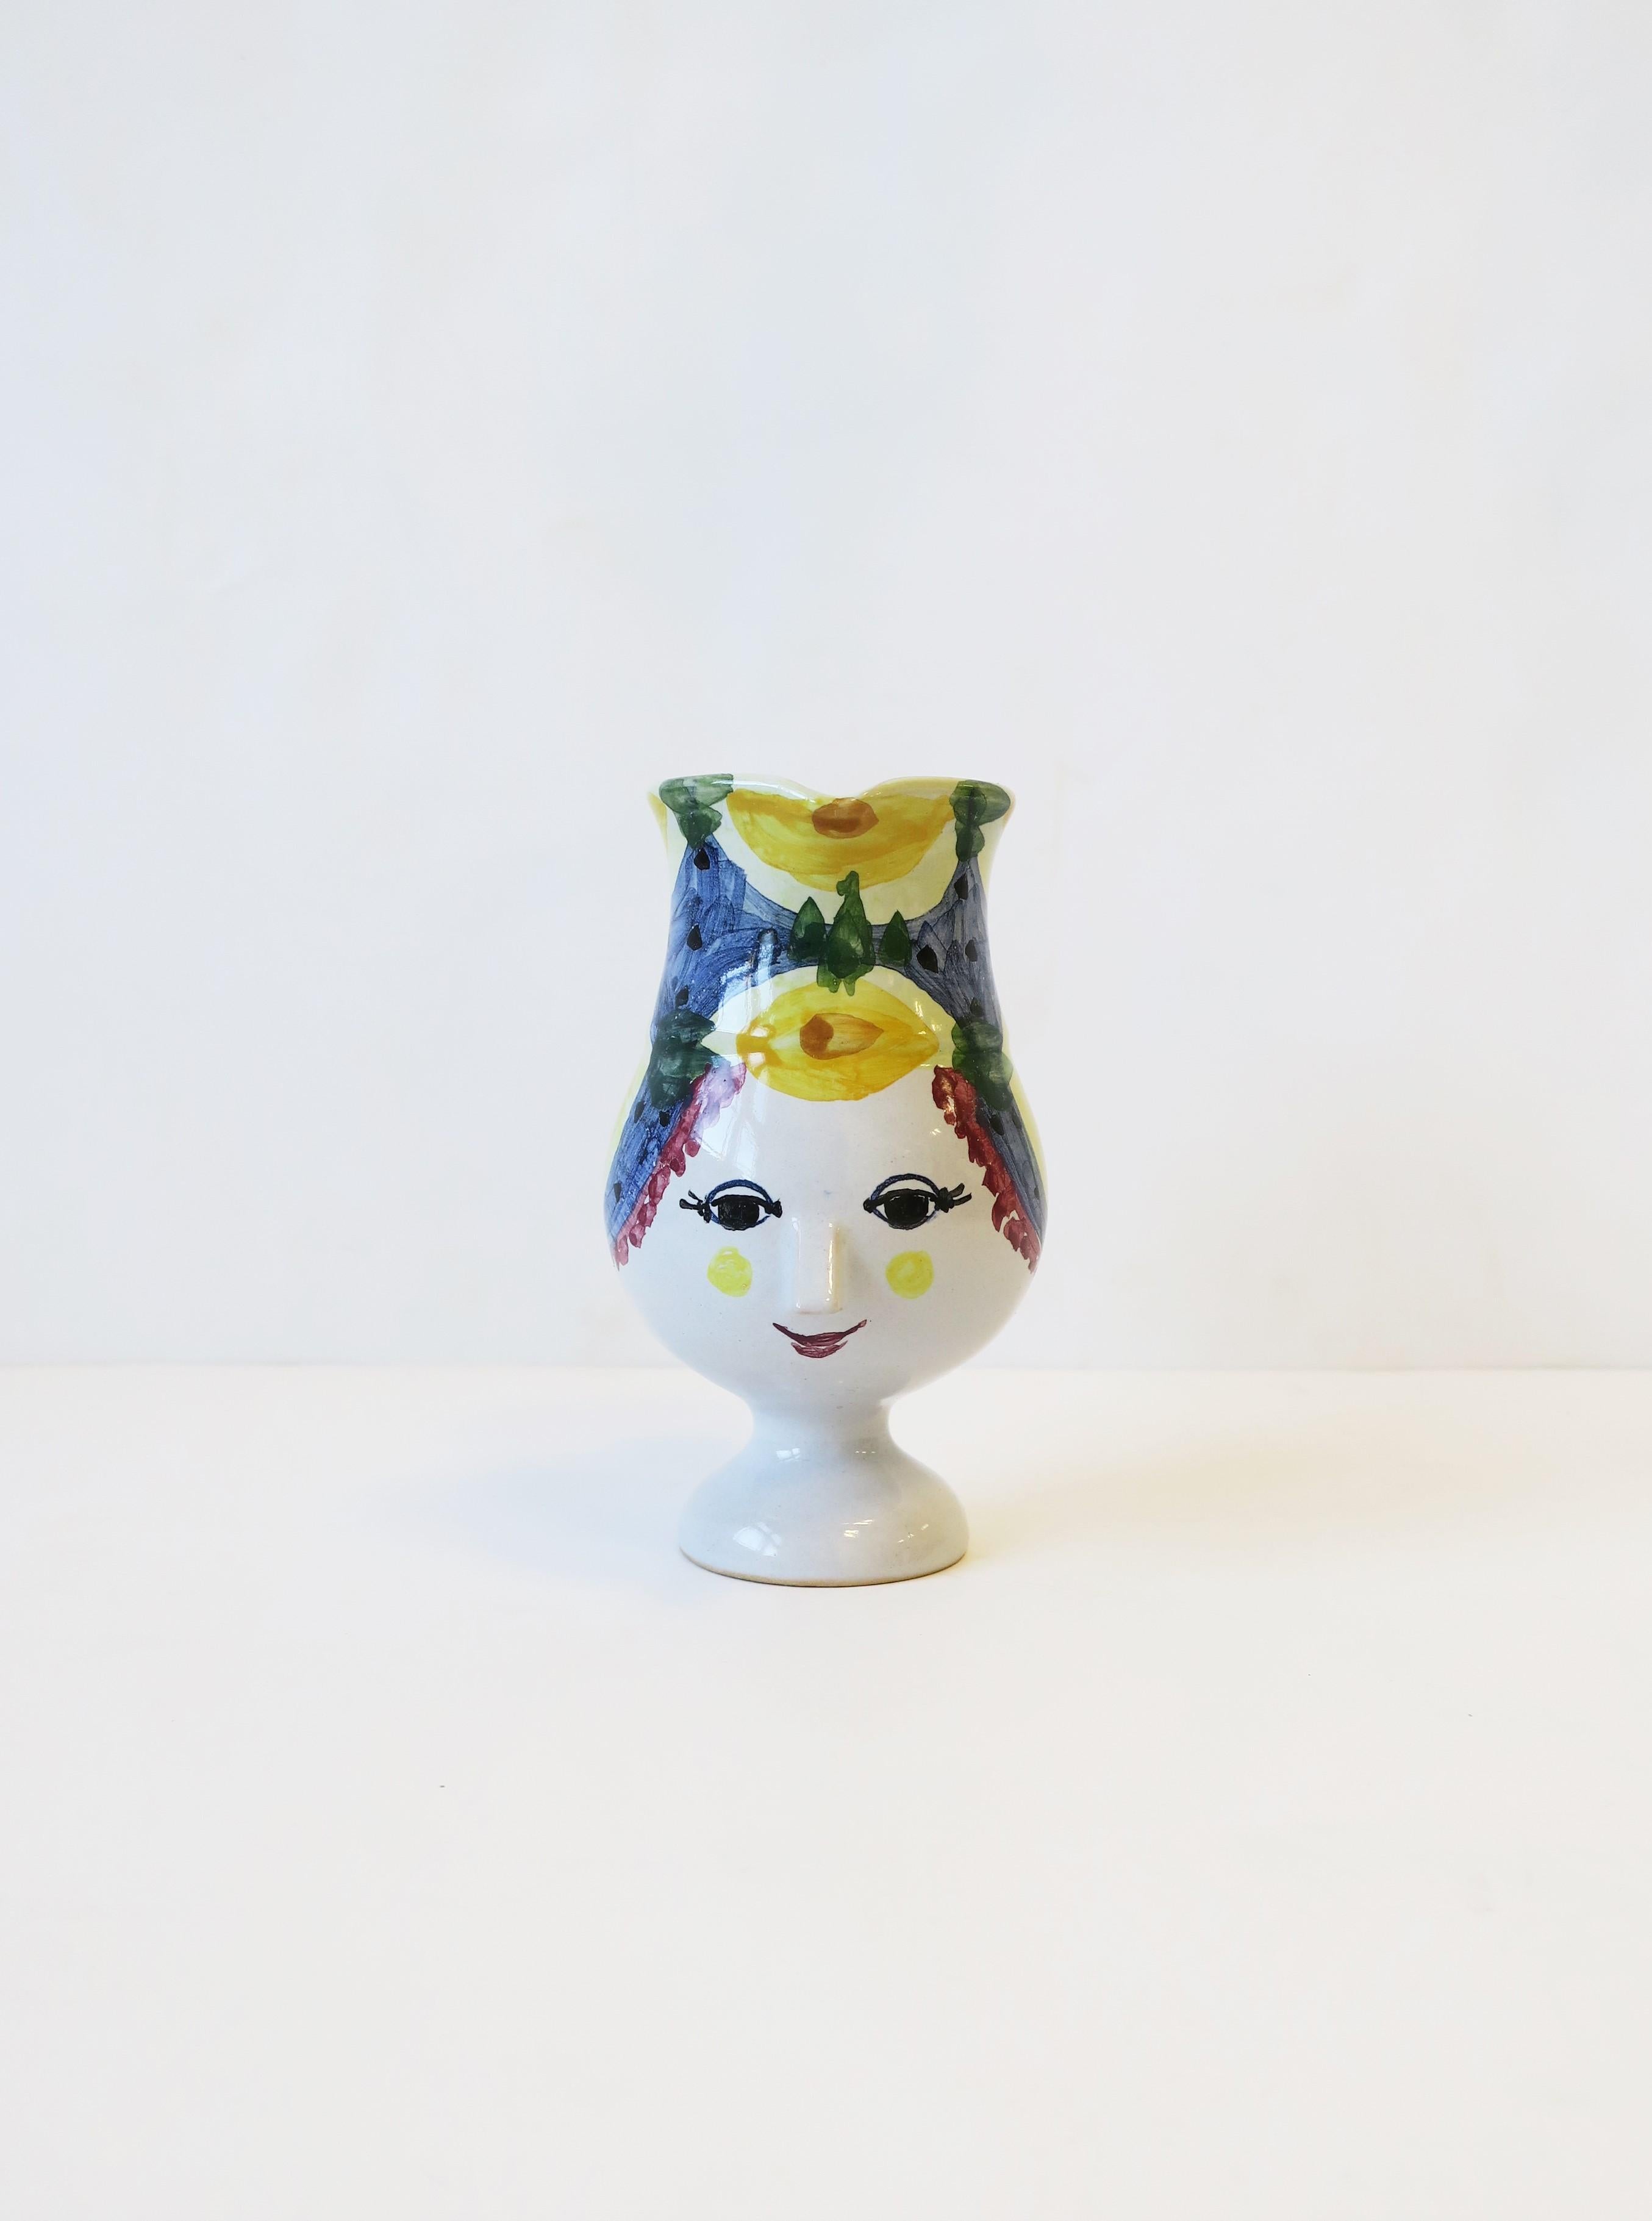 1990s Denmark by Danish designer Bjorn Wiinblad, a figural sculpture piece pitcher vessel, 1998. With designers signature, origin, and year on bottom as show in images #11. Measures: 4.63